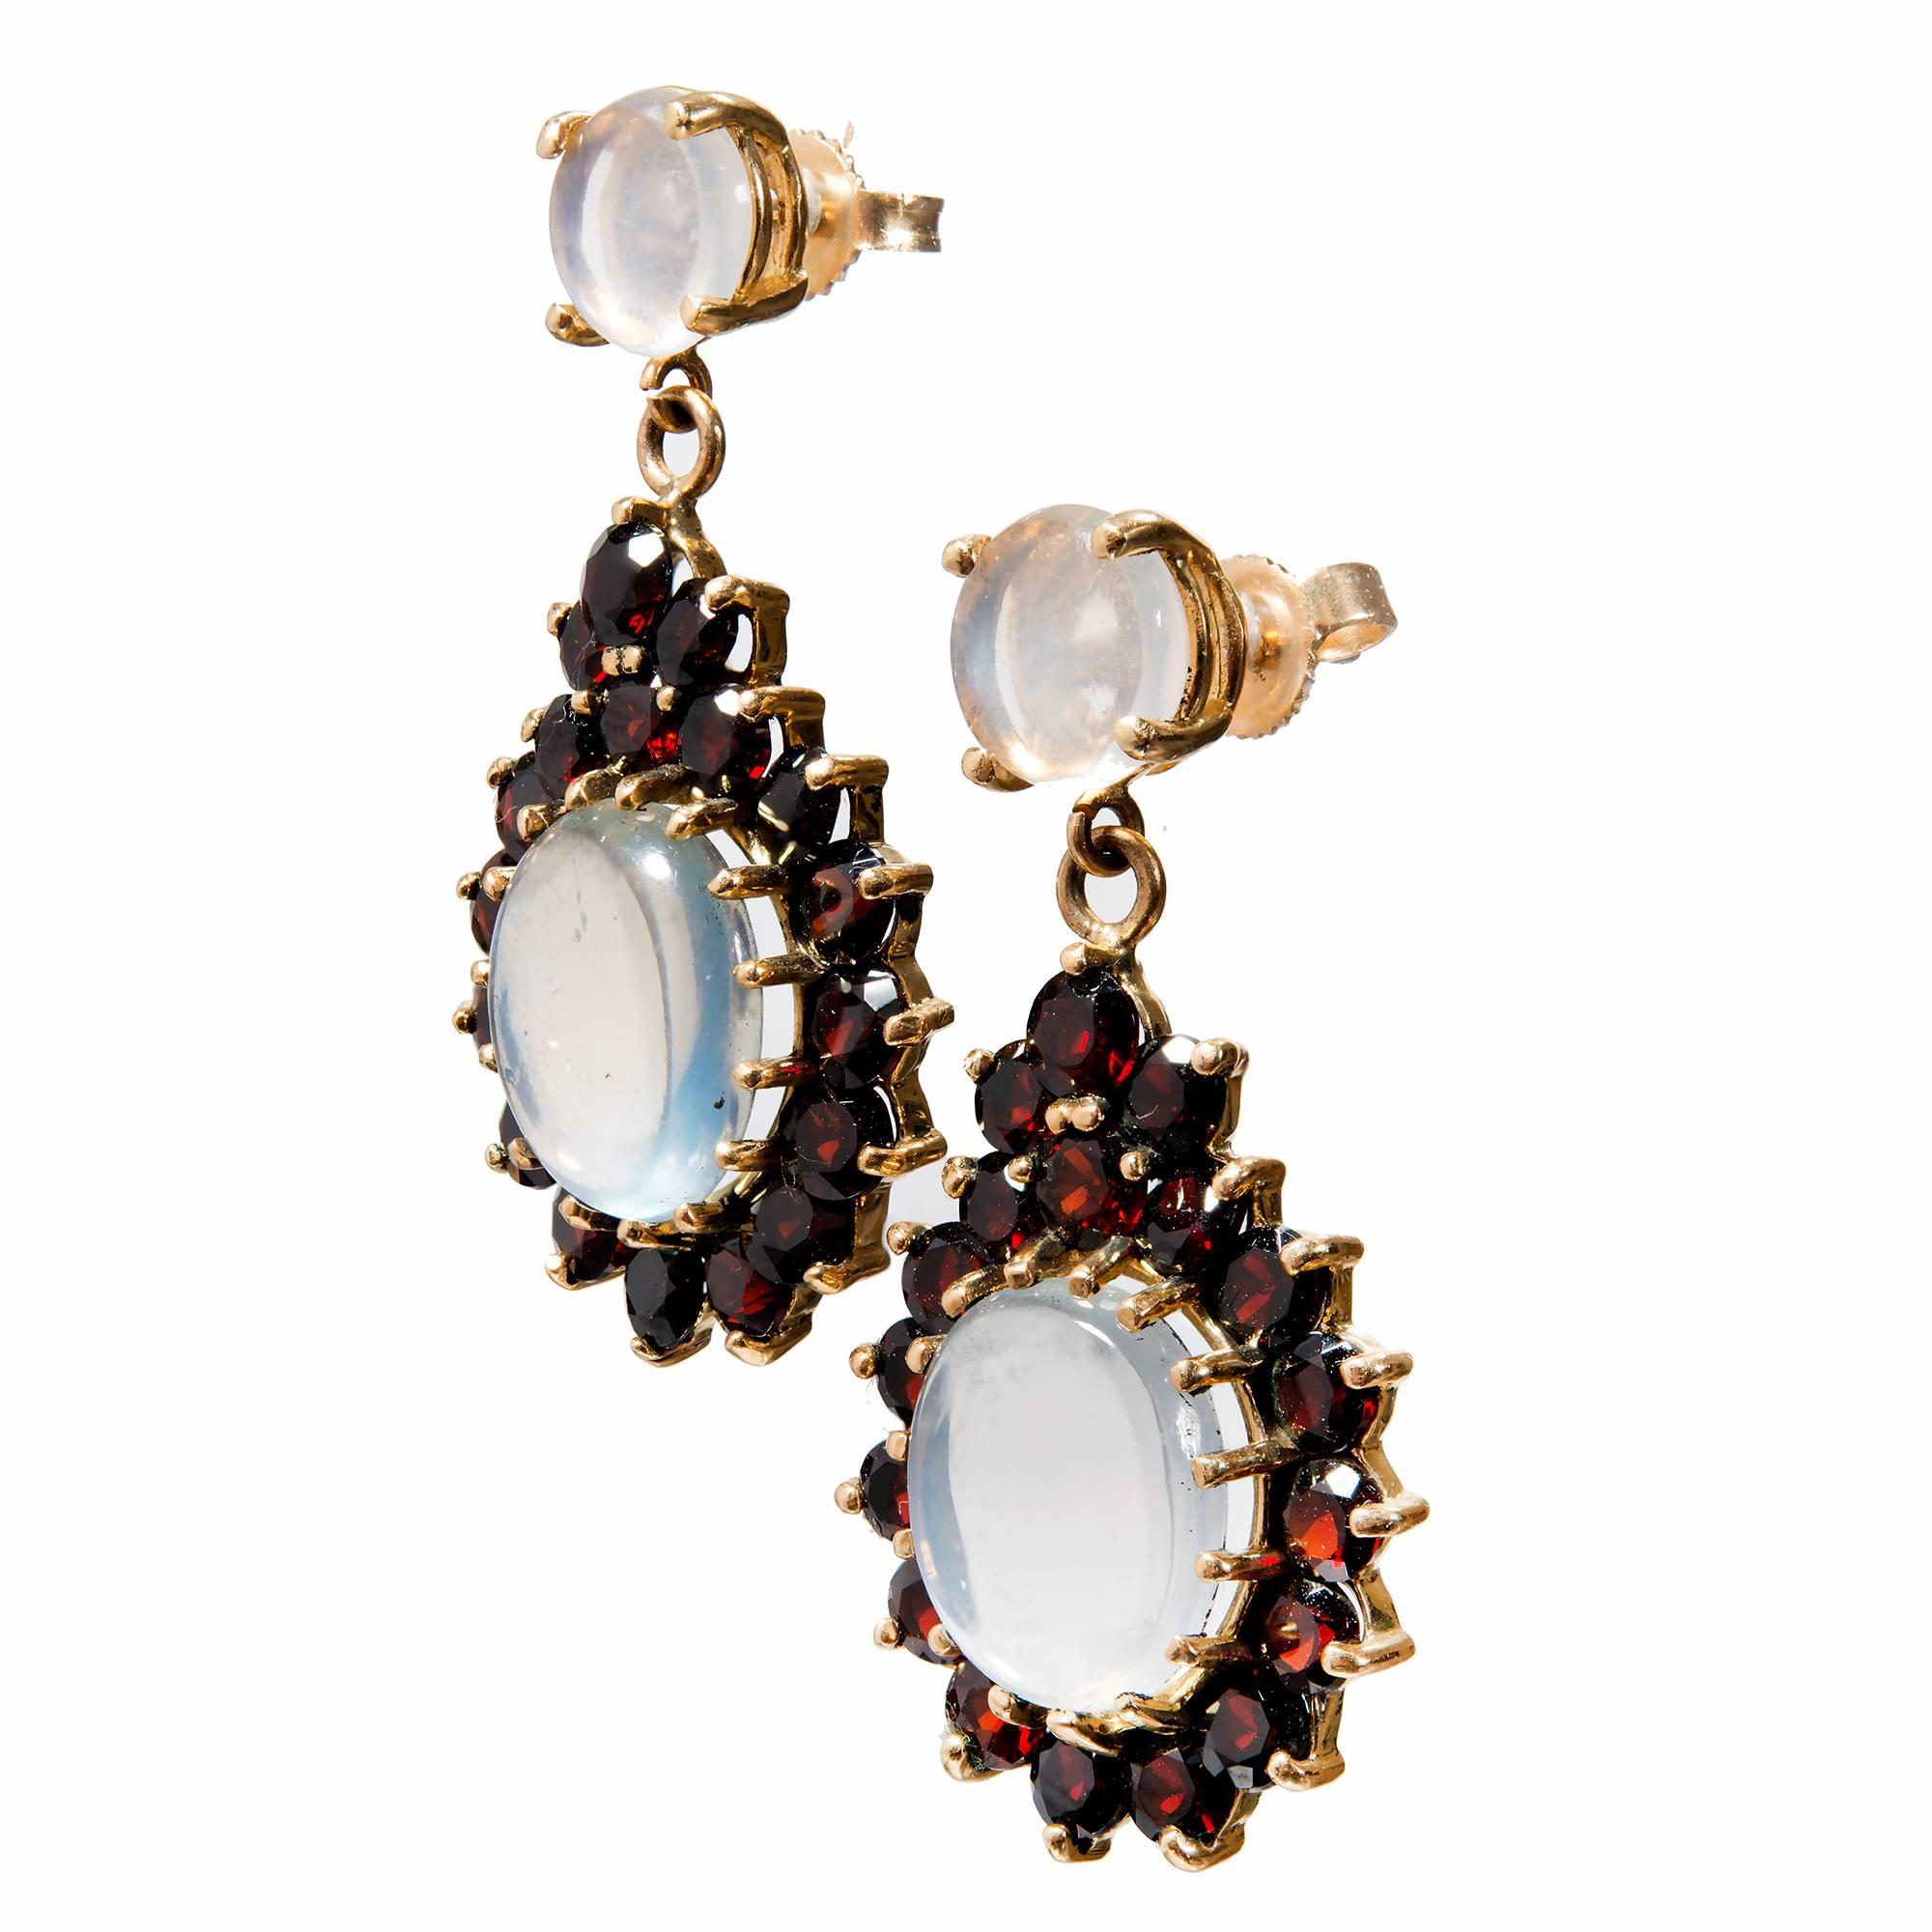 Moonstone and garnet dangle earrings. 2 round moonstone tops with 2 oval dangle moonstones with a halo of 36 round garnets in 14k yellow gold. 

2 blue round Moonstones 7.3mm
2 oval blue Moonstones (1) 11.5 x 10.5mm (1) 11.5 x 9.8mm
36 round Garnets